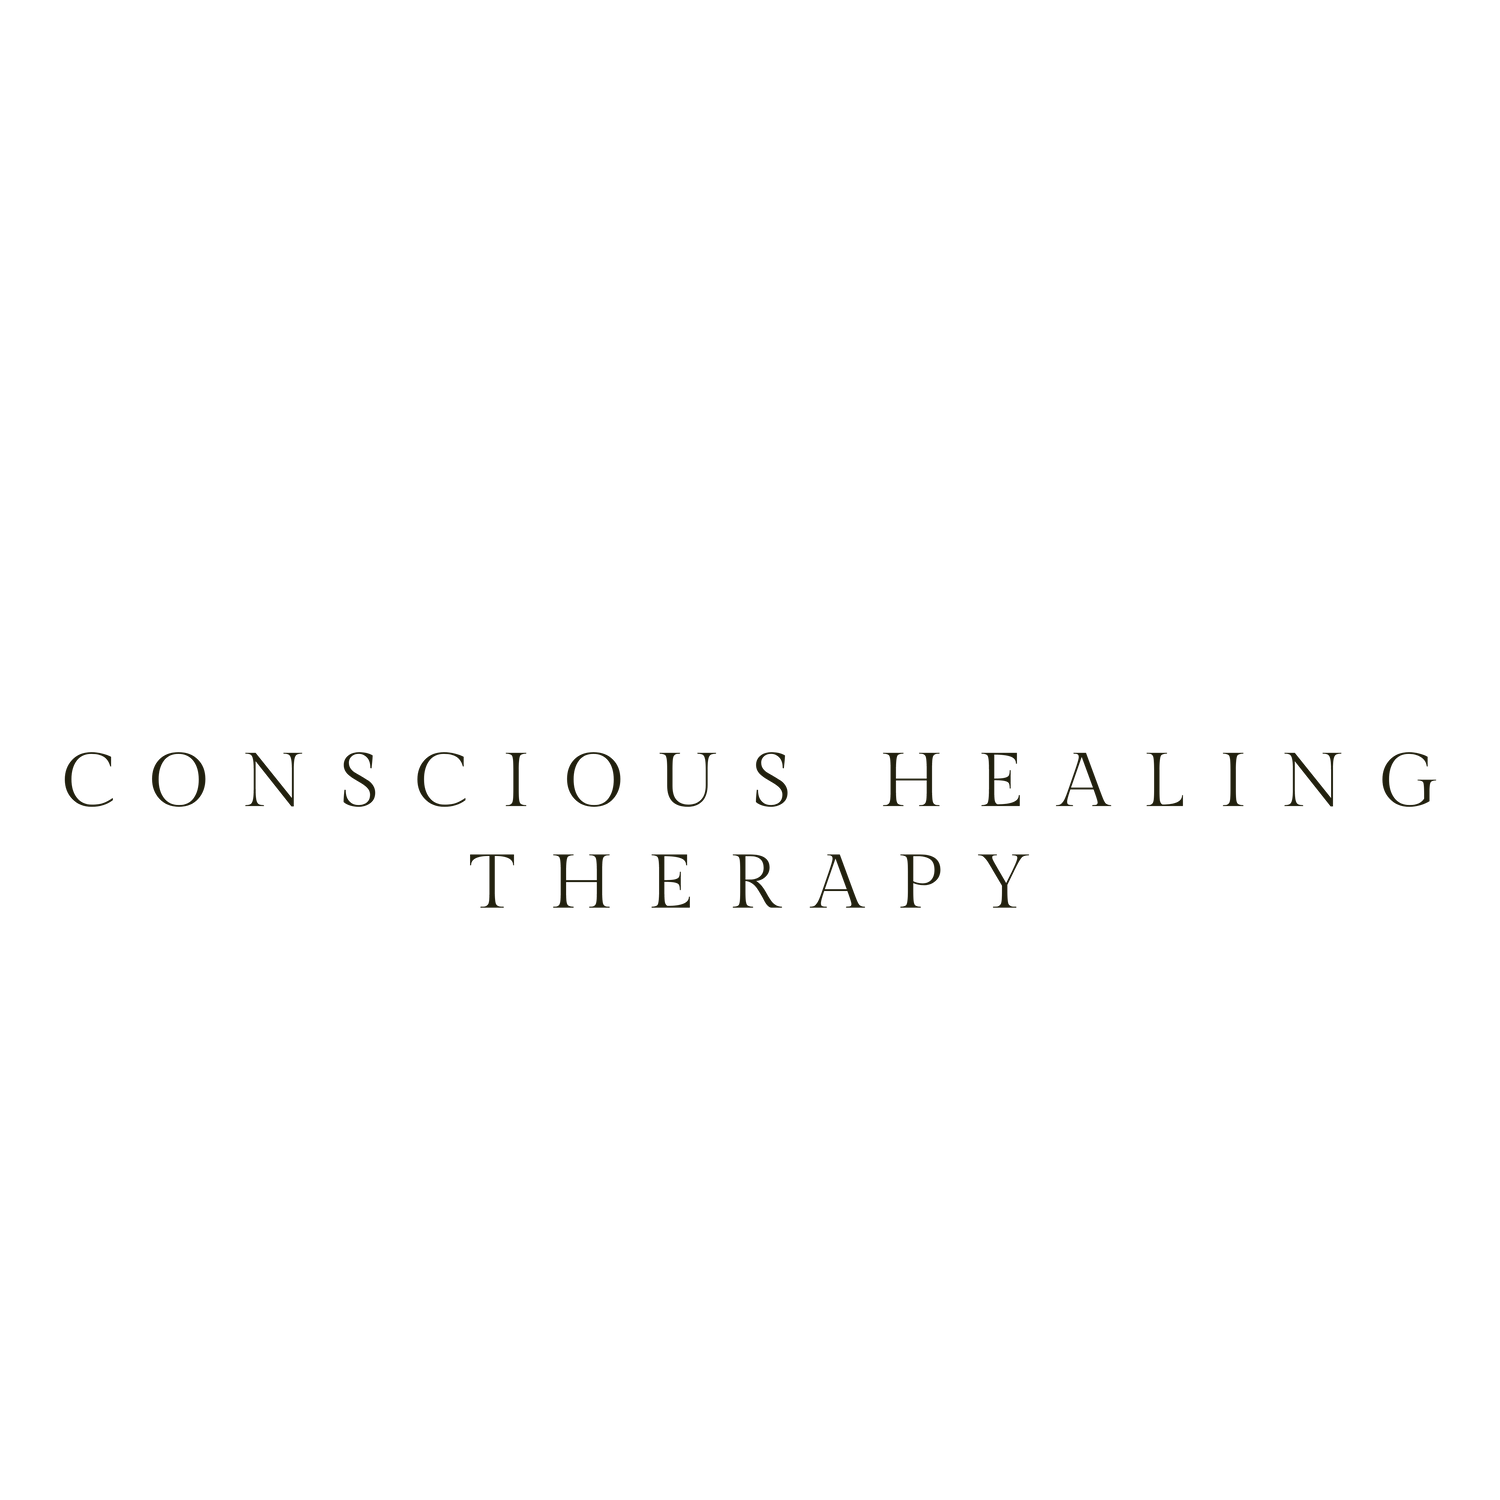 Gallery Photo of Conscious Healing Therapy logo